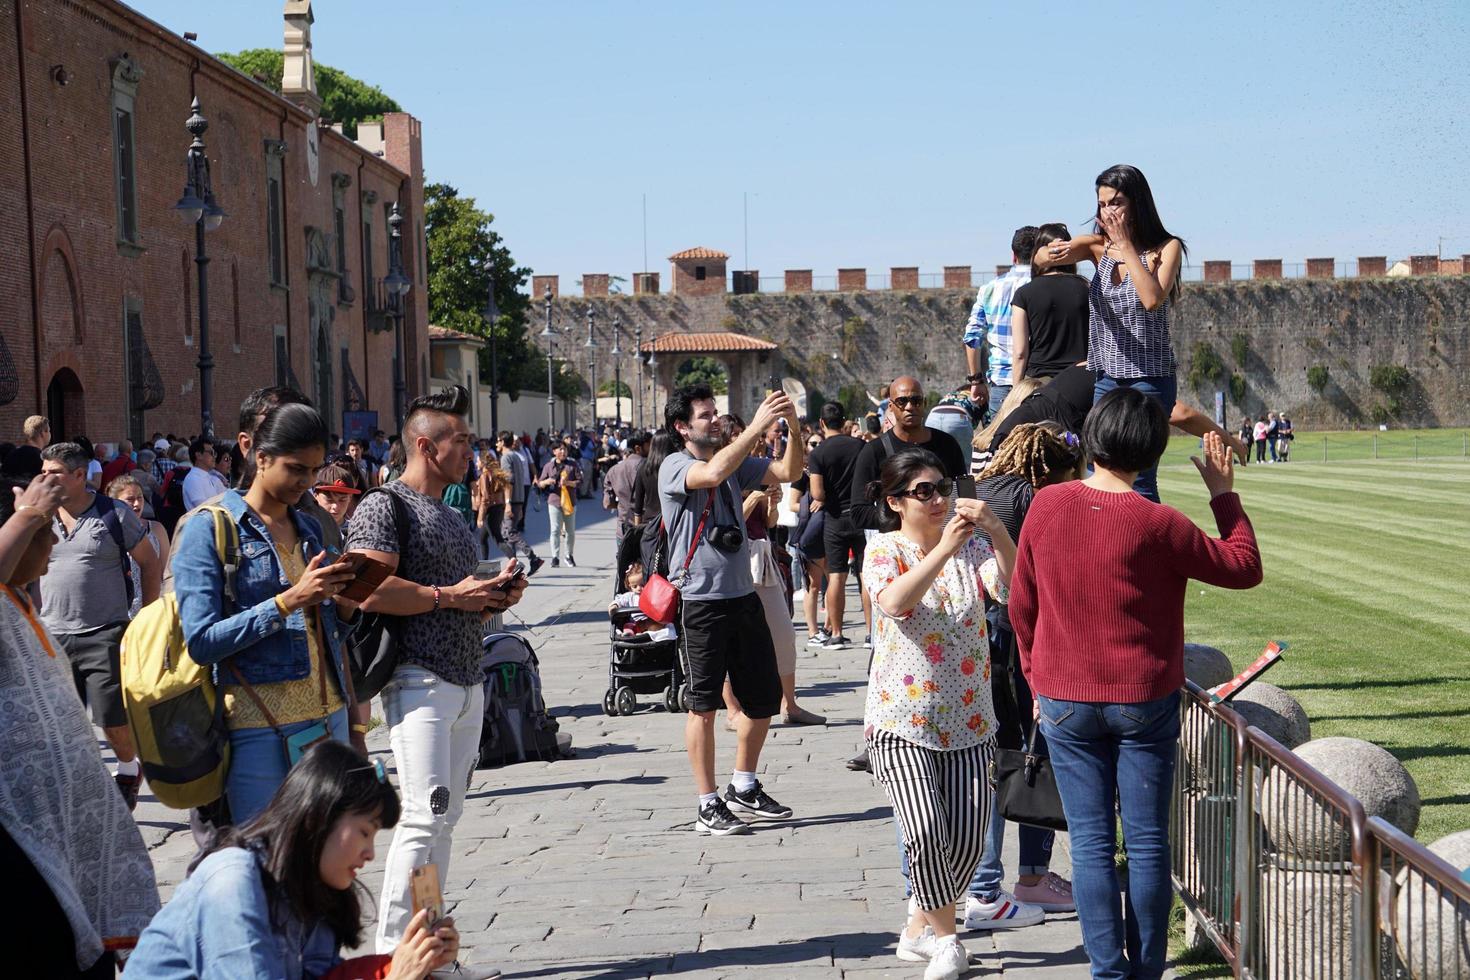 PISA, ITALY - SEPTEMBER 26 2017 - Tourist taking pictures at famous leaning tower photo